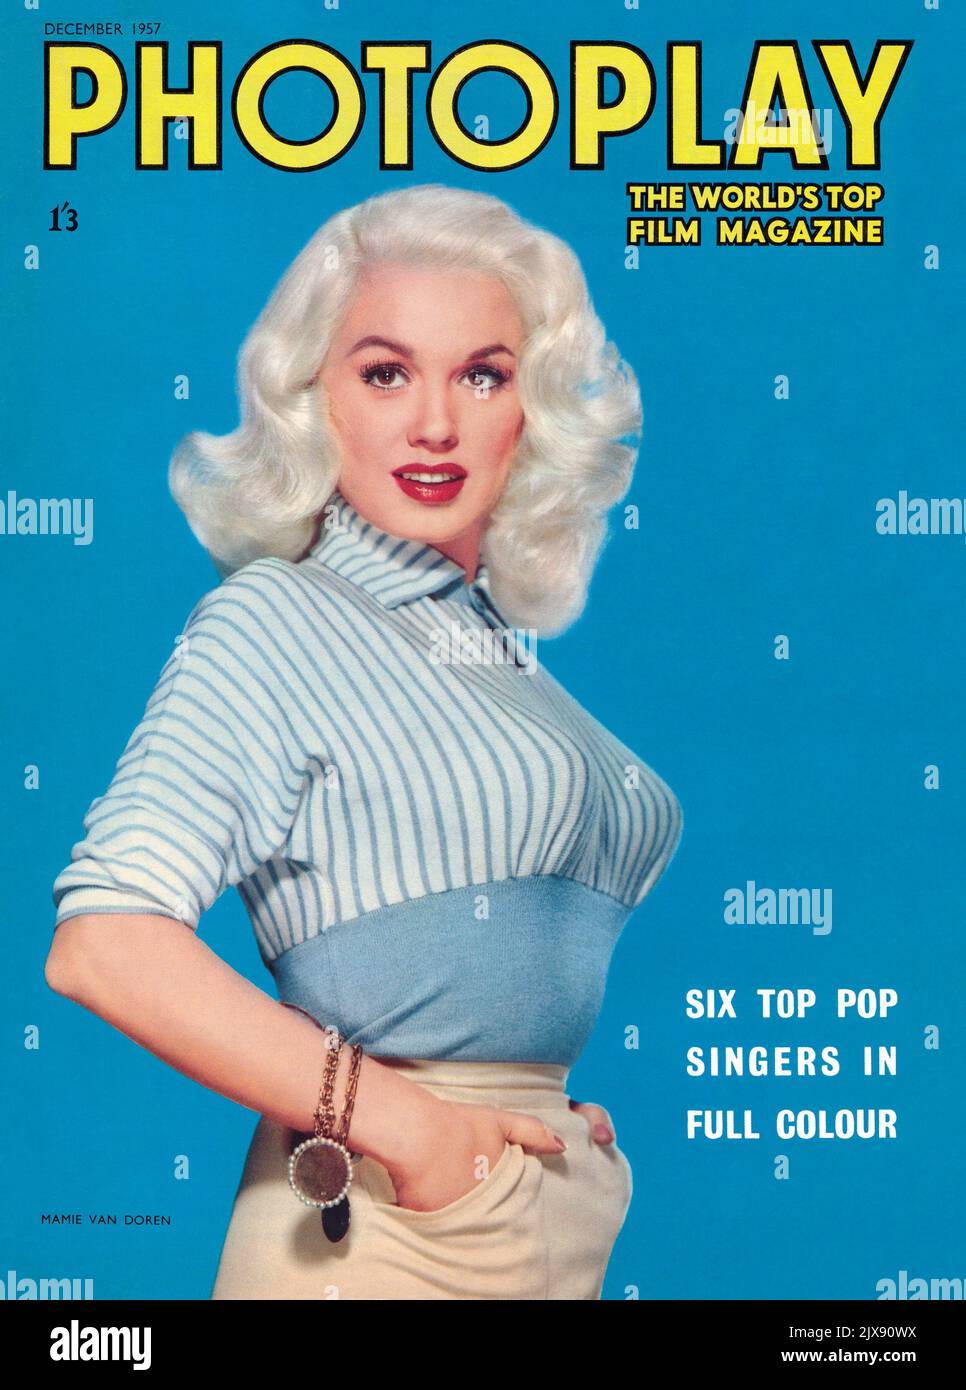 Vintage magazine front cover of Photoplay film magazine for December 1957, featuring actress Mamie Van Doren. Stock Photo